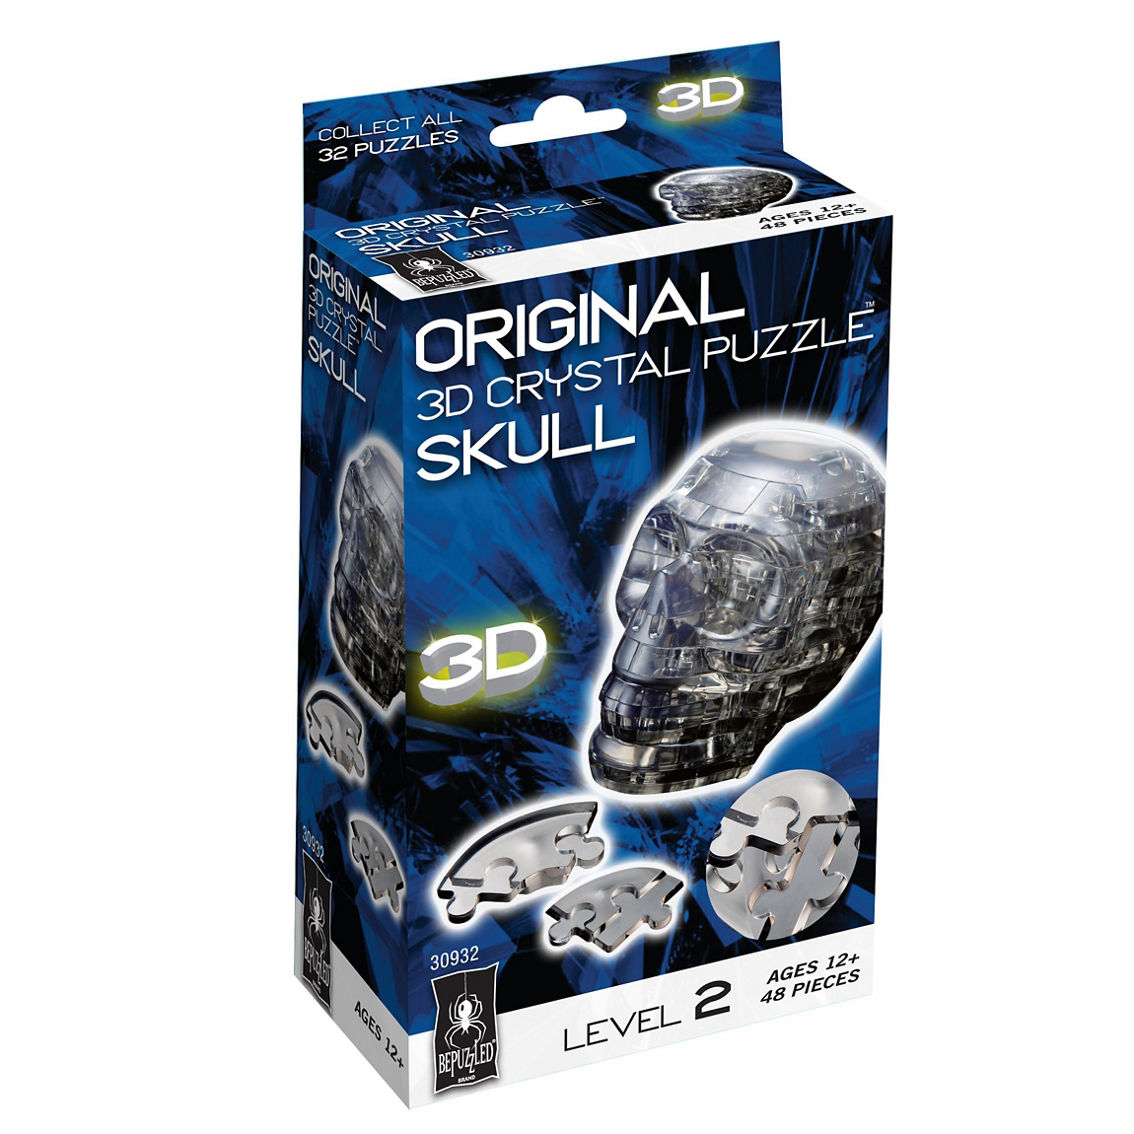 BePuzzled 3D Crystal Puzzle - Skull: 48 Pcs - Image 2 of 2